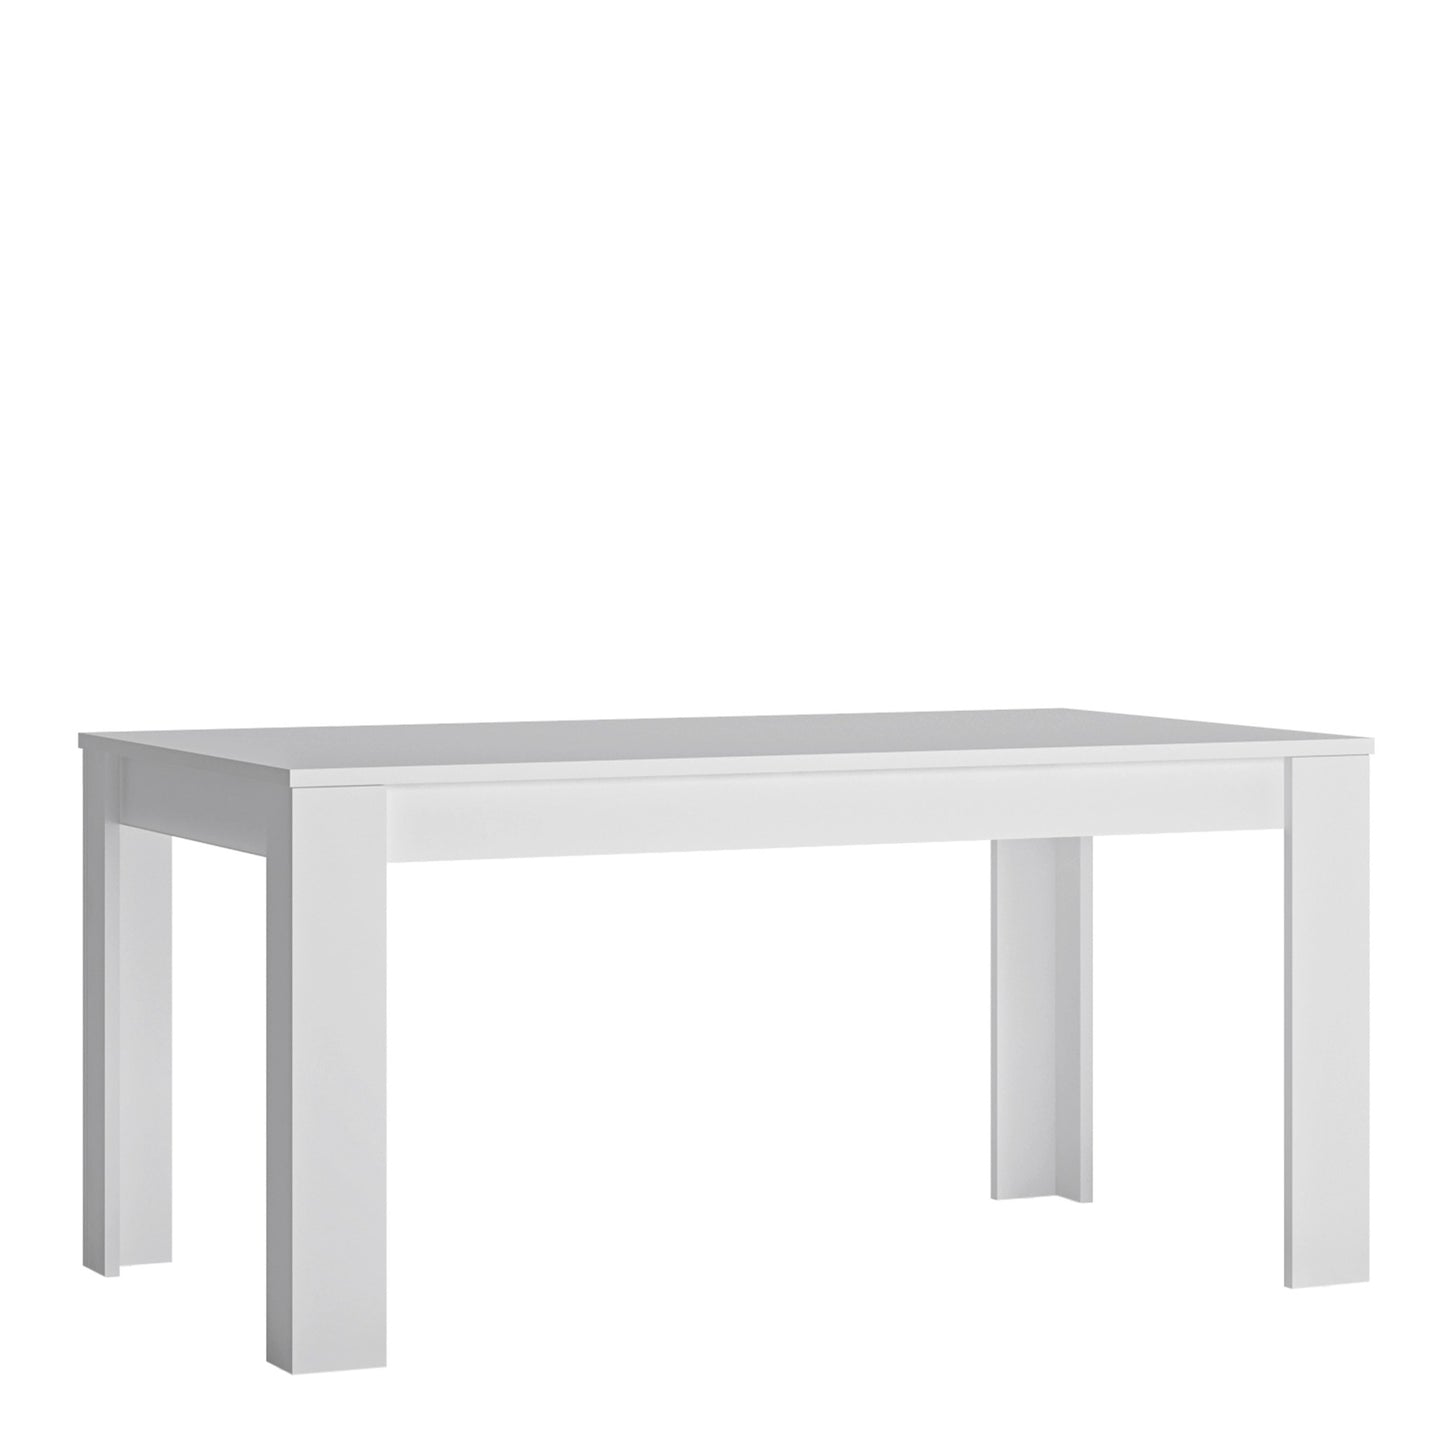 Furniture To Go Lyon Large Extending Dining Table 160/200cm in White & High Gloss